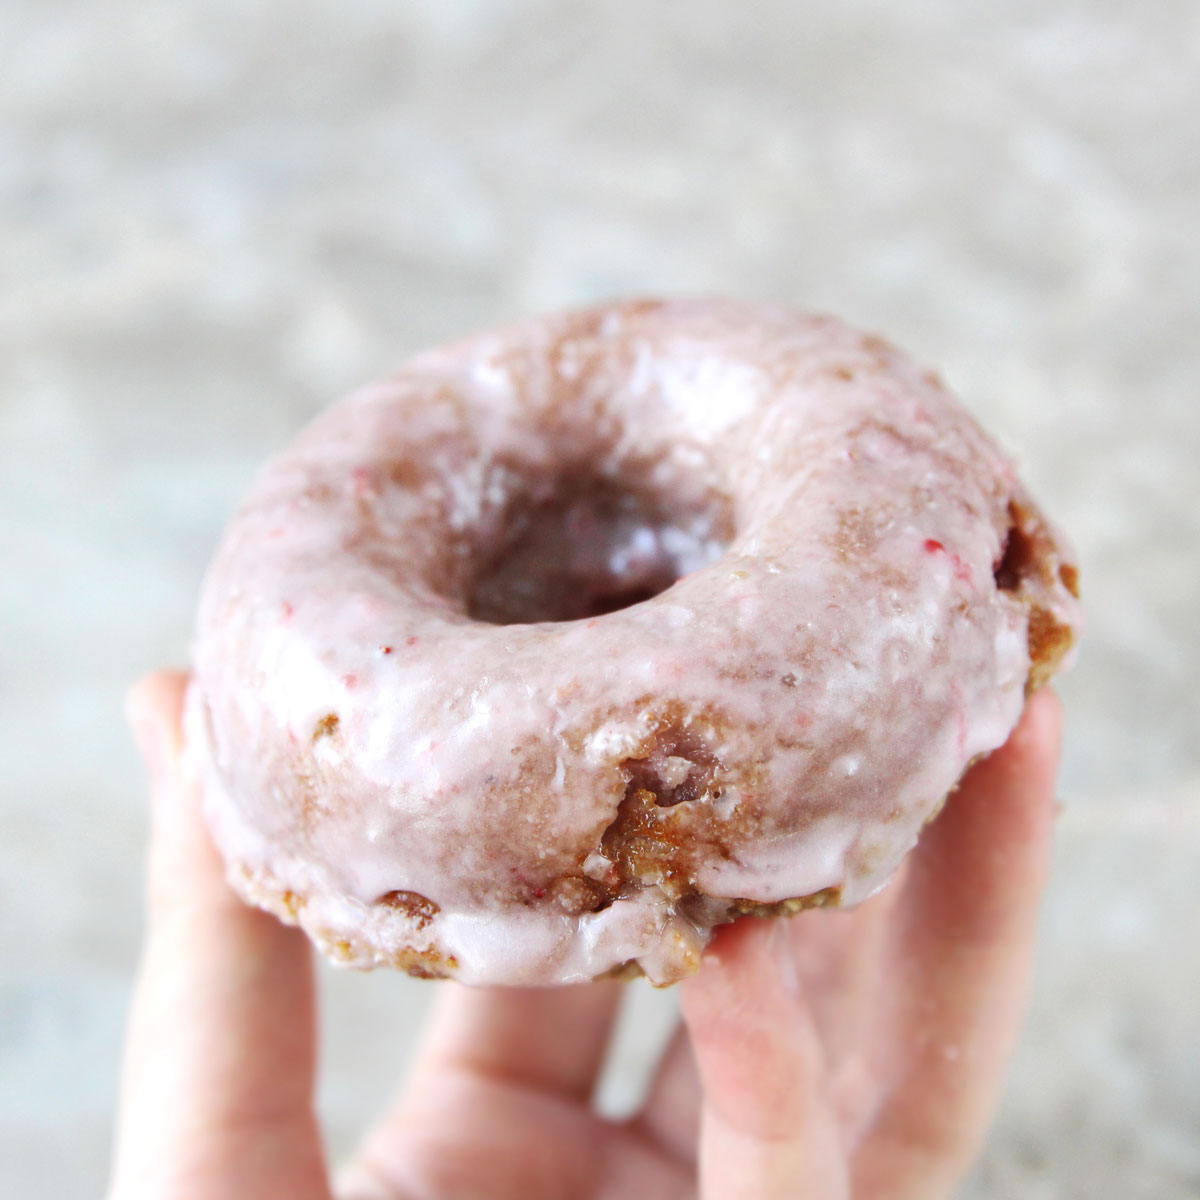 Almond Flour & Oatmeal Cinnamon Sugar Baked Donuts (Made Gluten-Free) - baked donuts